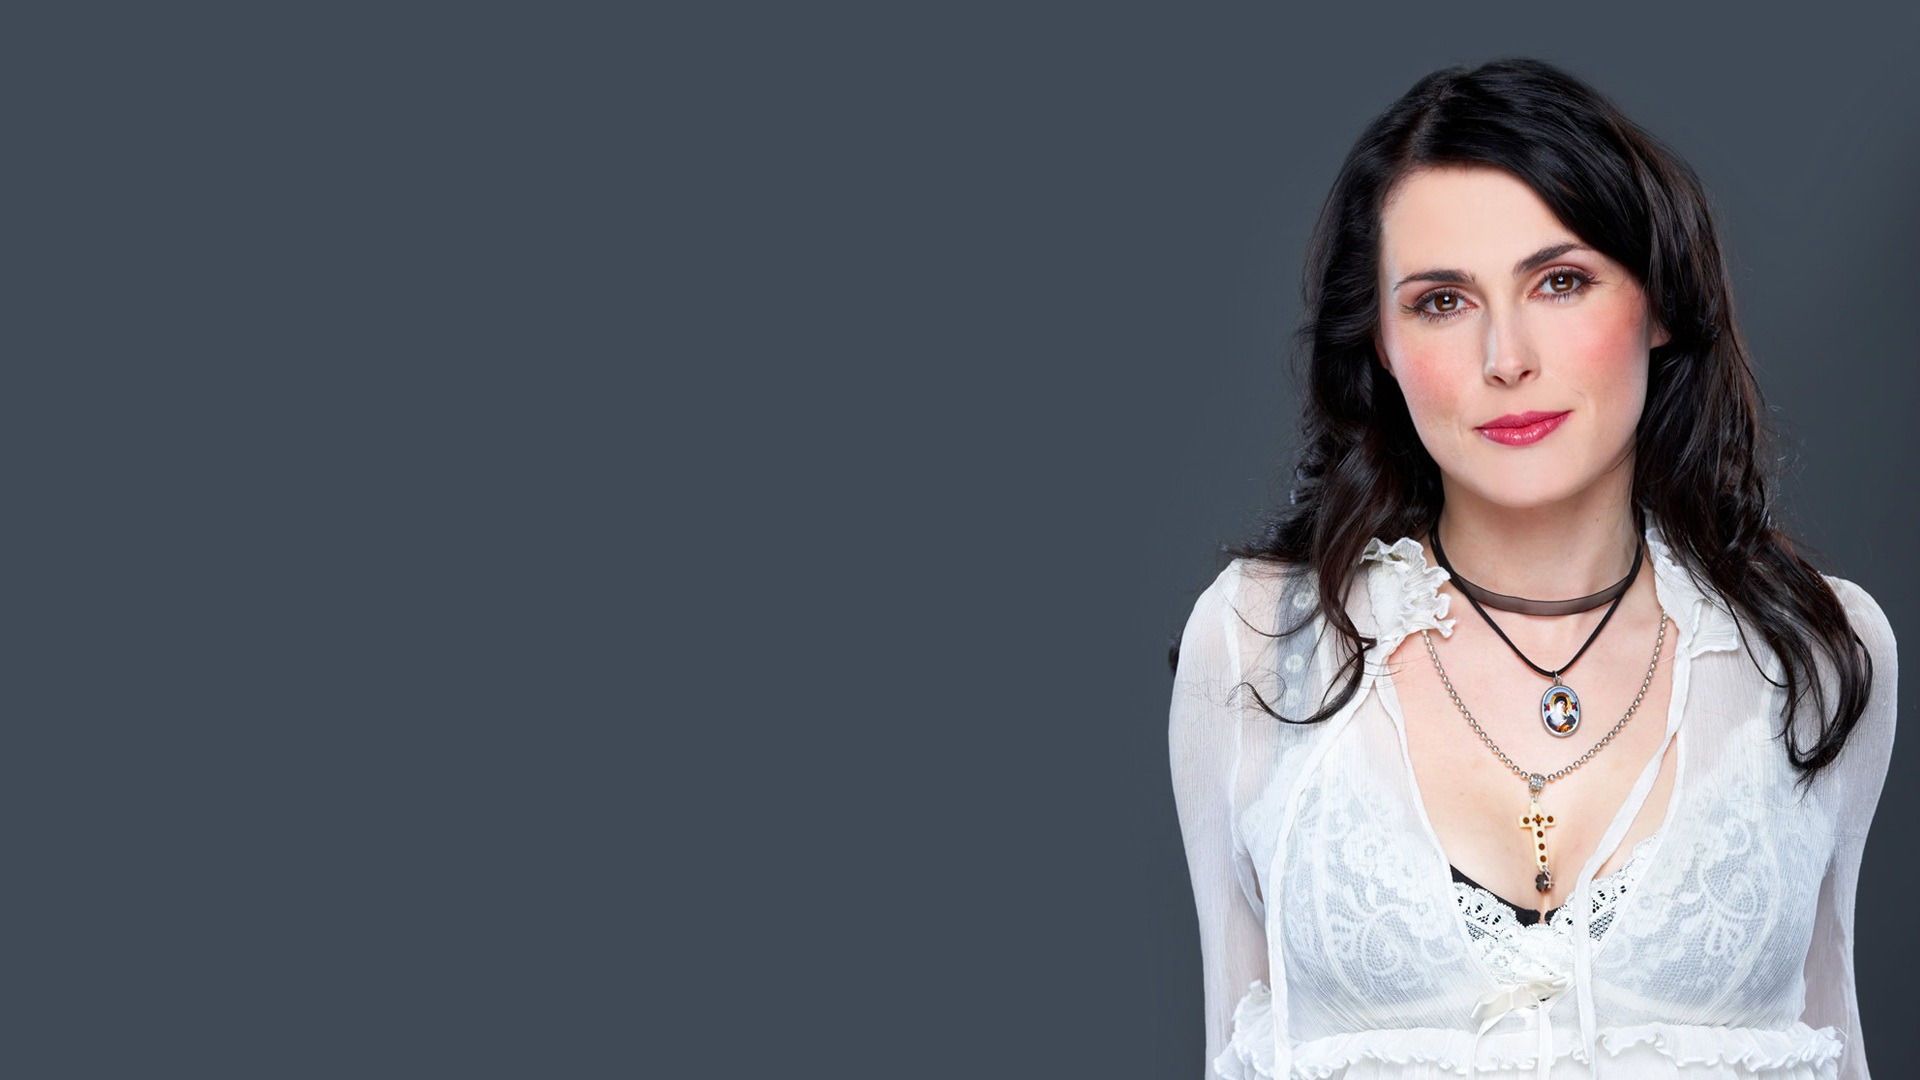 Sharon den Adel #006 - 1920x1080 Wallpapers Pictures Photos Images